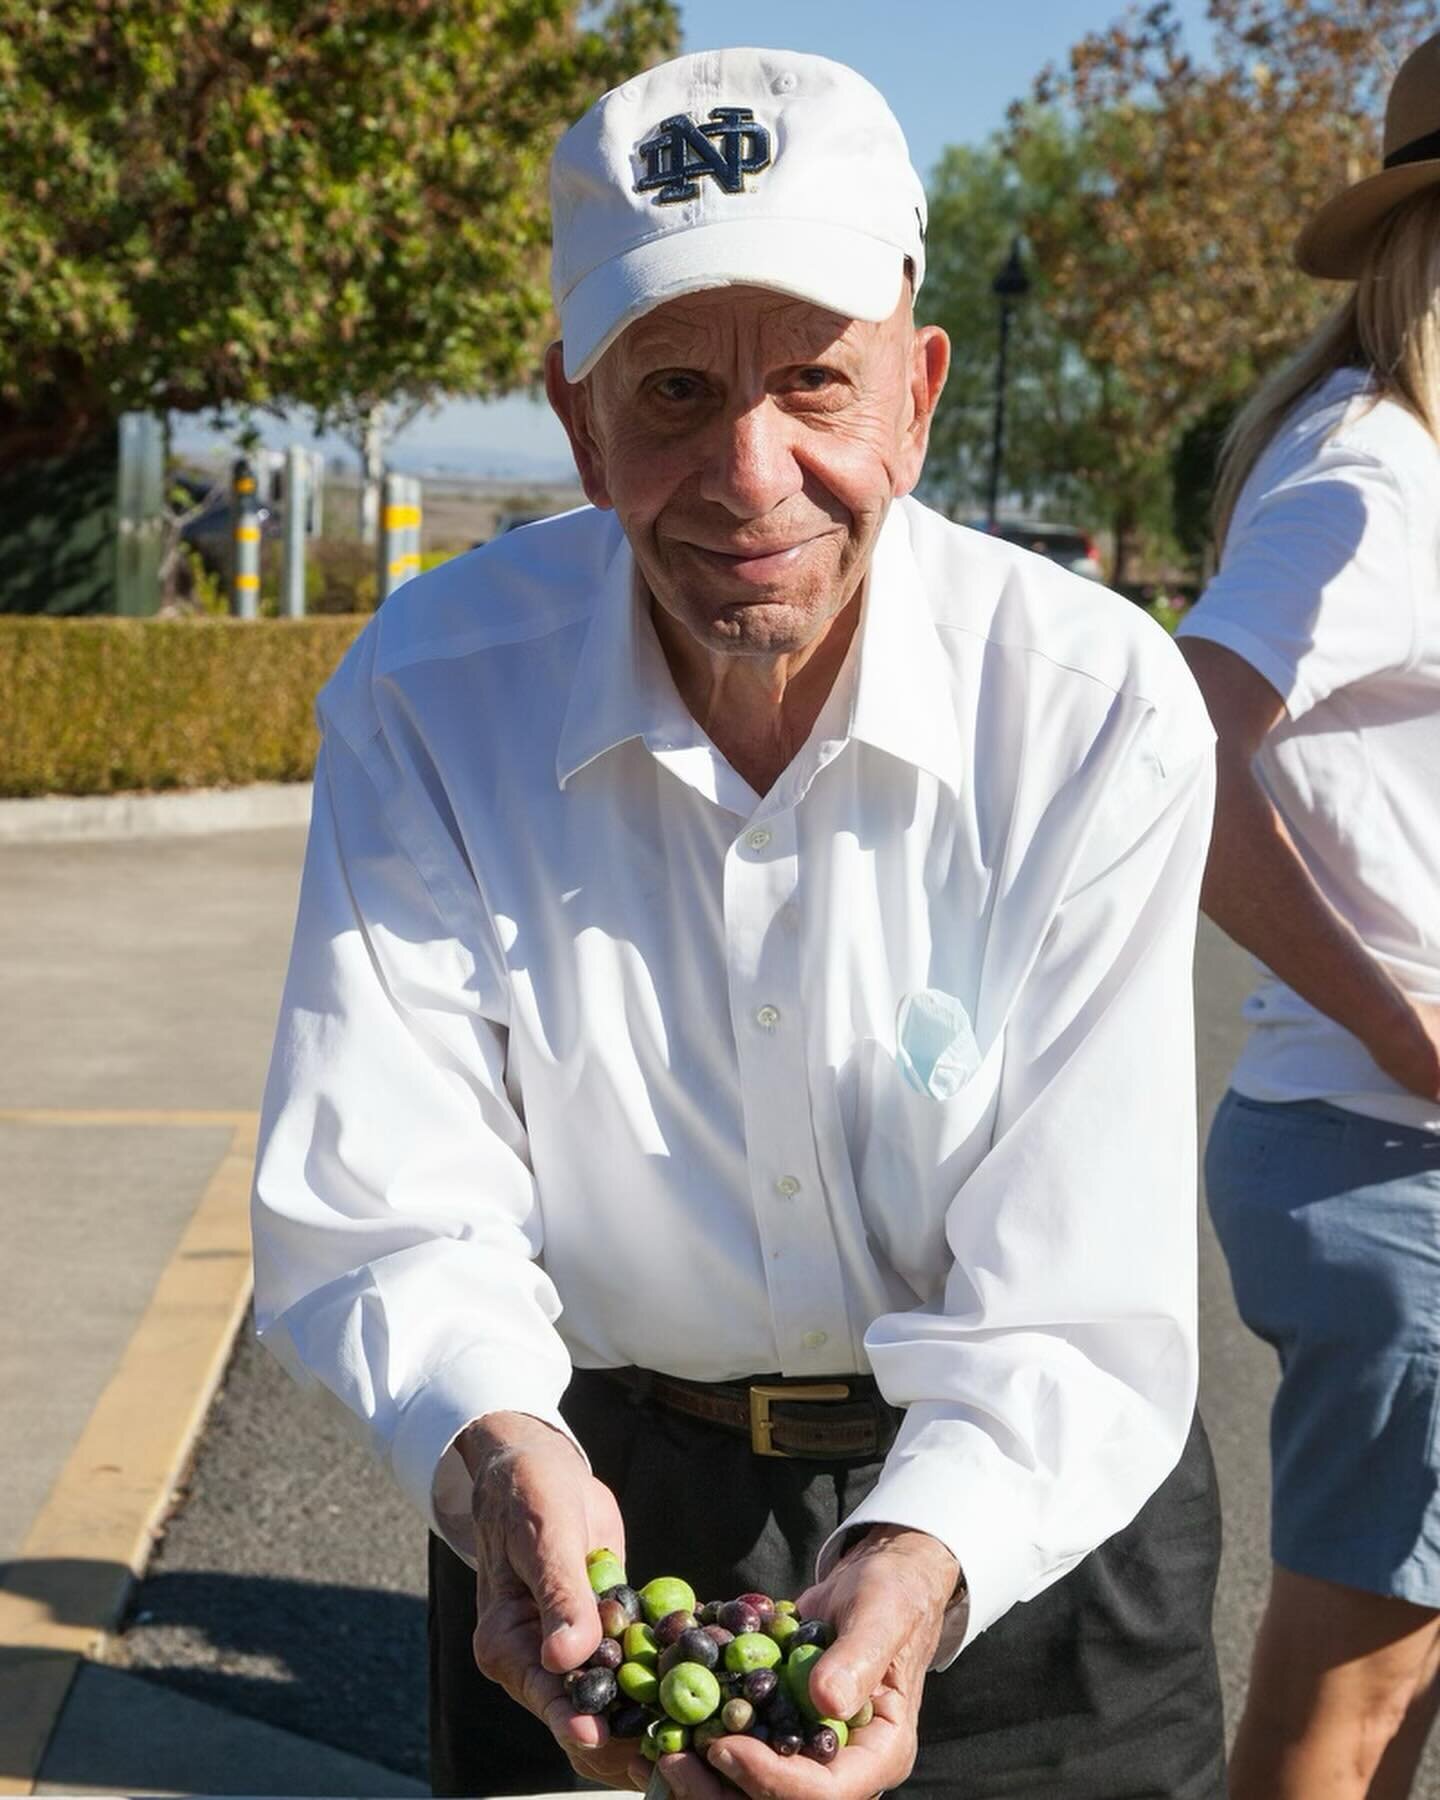 It is with sadness that SacaSabella Farms announces the passing of the original &ldquo;Papa Saca&rdquo;, Anton (&ldquo;Tony&rdquo;) Saca.

Tony loved visiting us and participated in numerous olive harvests at SacaSabella Farms as it reminded him of t